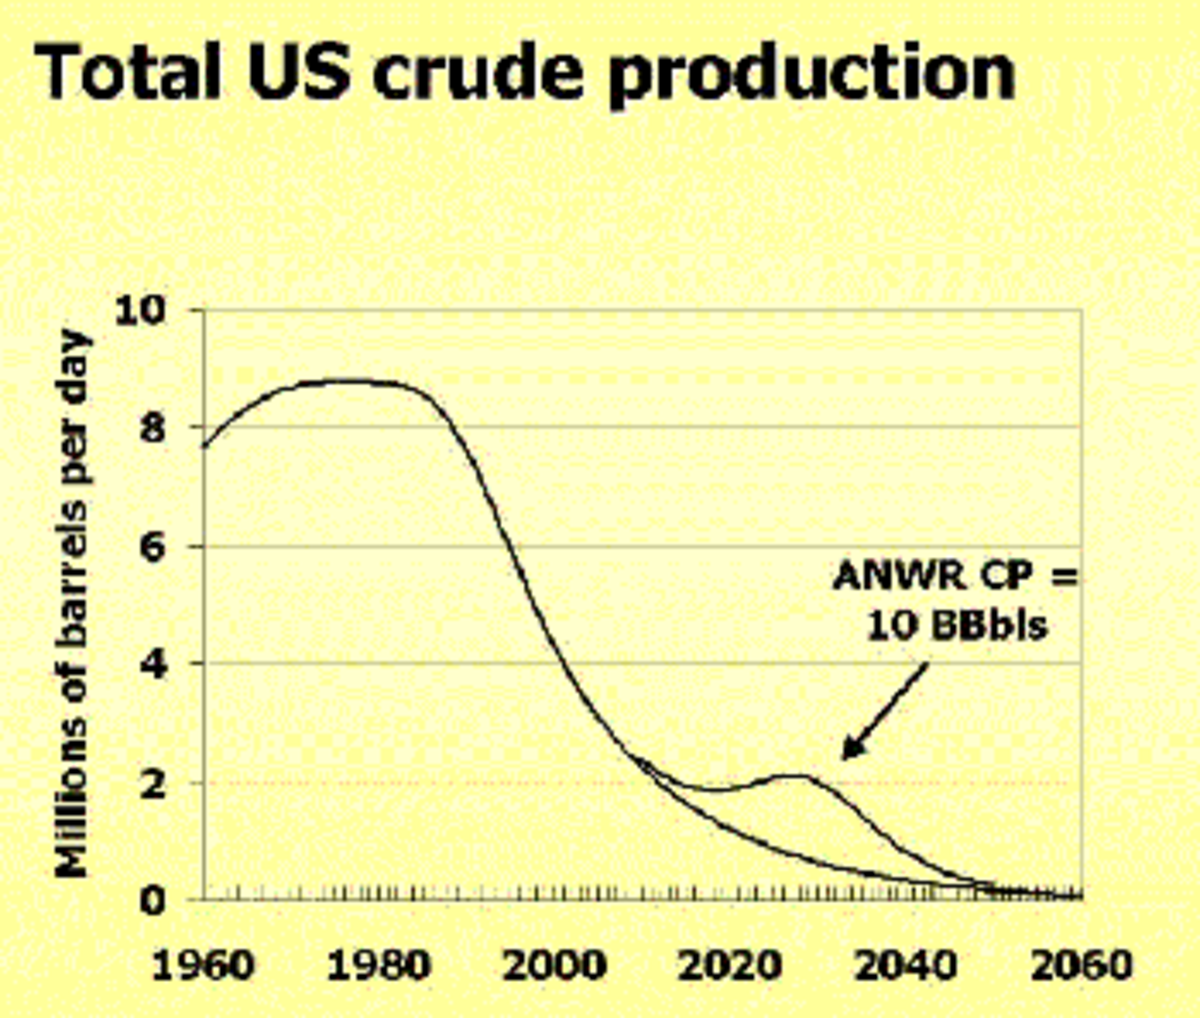 Source: World Resource Institute. The “ANWR” bump on the crude production curve is an indication of how projected production would be in Alaska’s National Wildlife Refuge. 